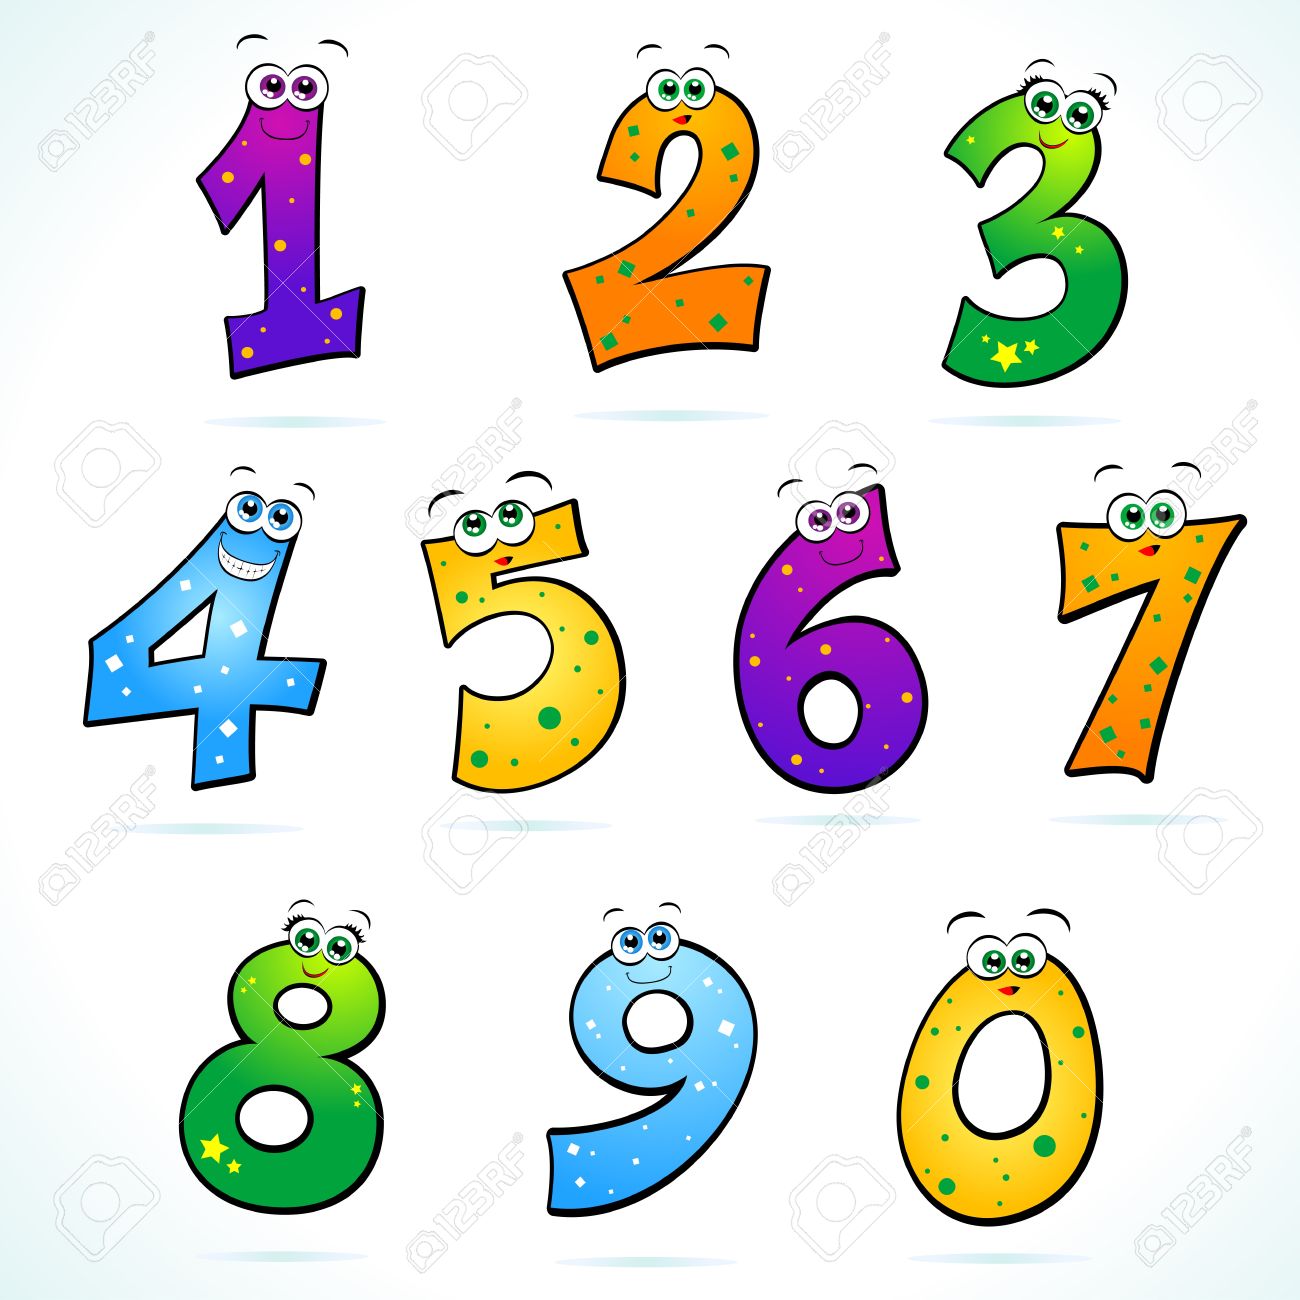 Clipart Numbers - Getbellhop